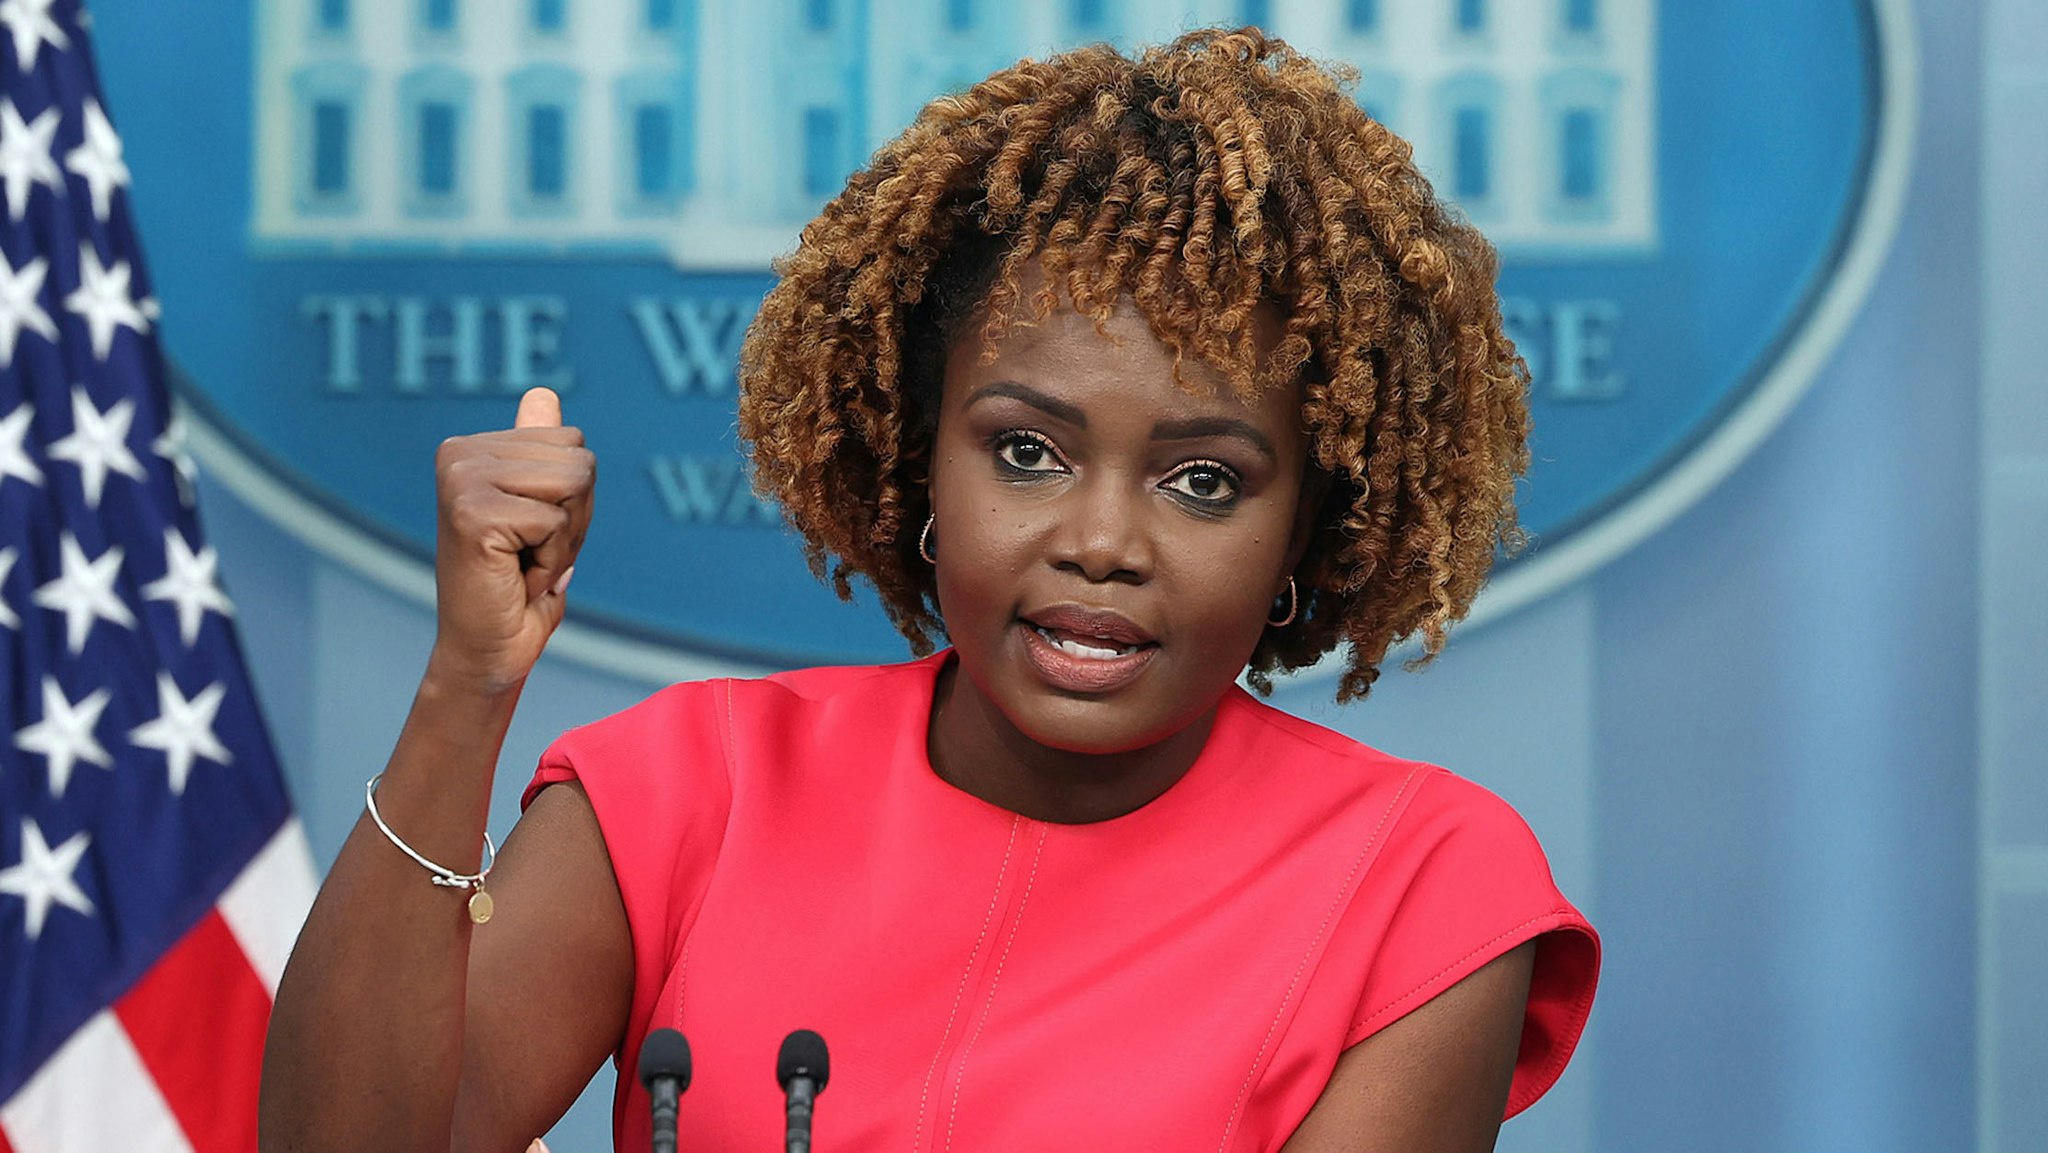 WASHINGTON, DC - OCTOBER 02: White House Press Secretary Karine Jean-Pierre speaks at the daily press briefing at the White House on October 02, 2023 in Washington, DC. Jean-Pierre spoke on Ukraine military funding, the autoworker strike, and government funding.